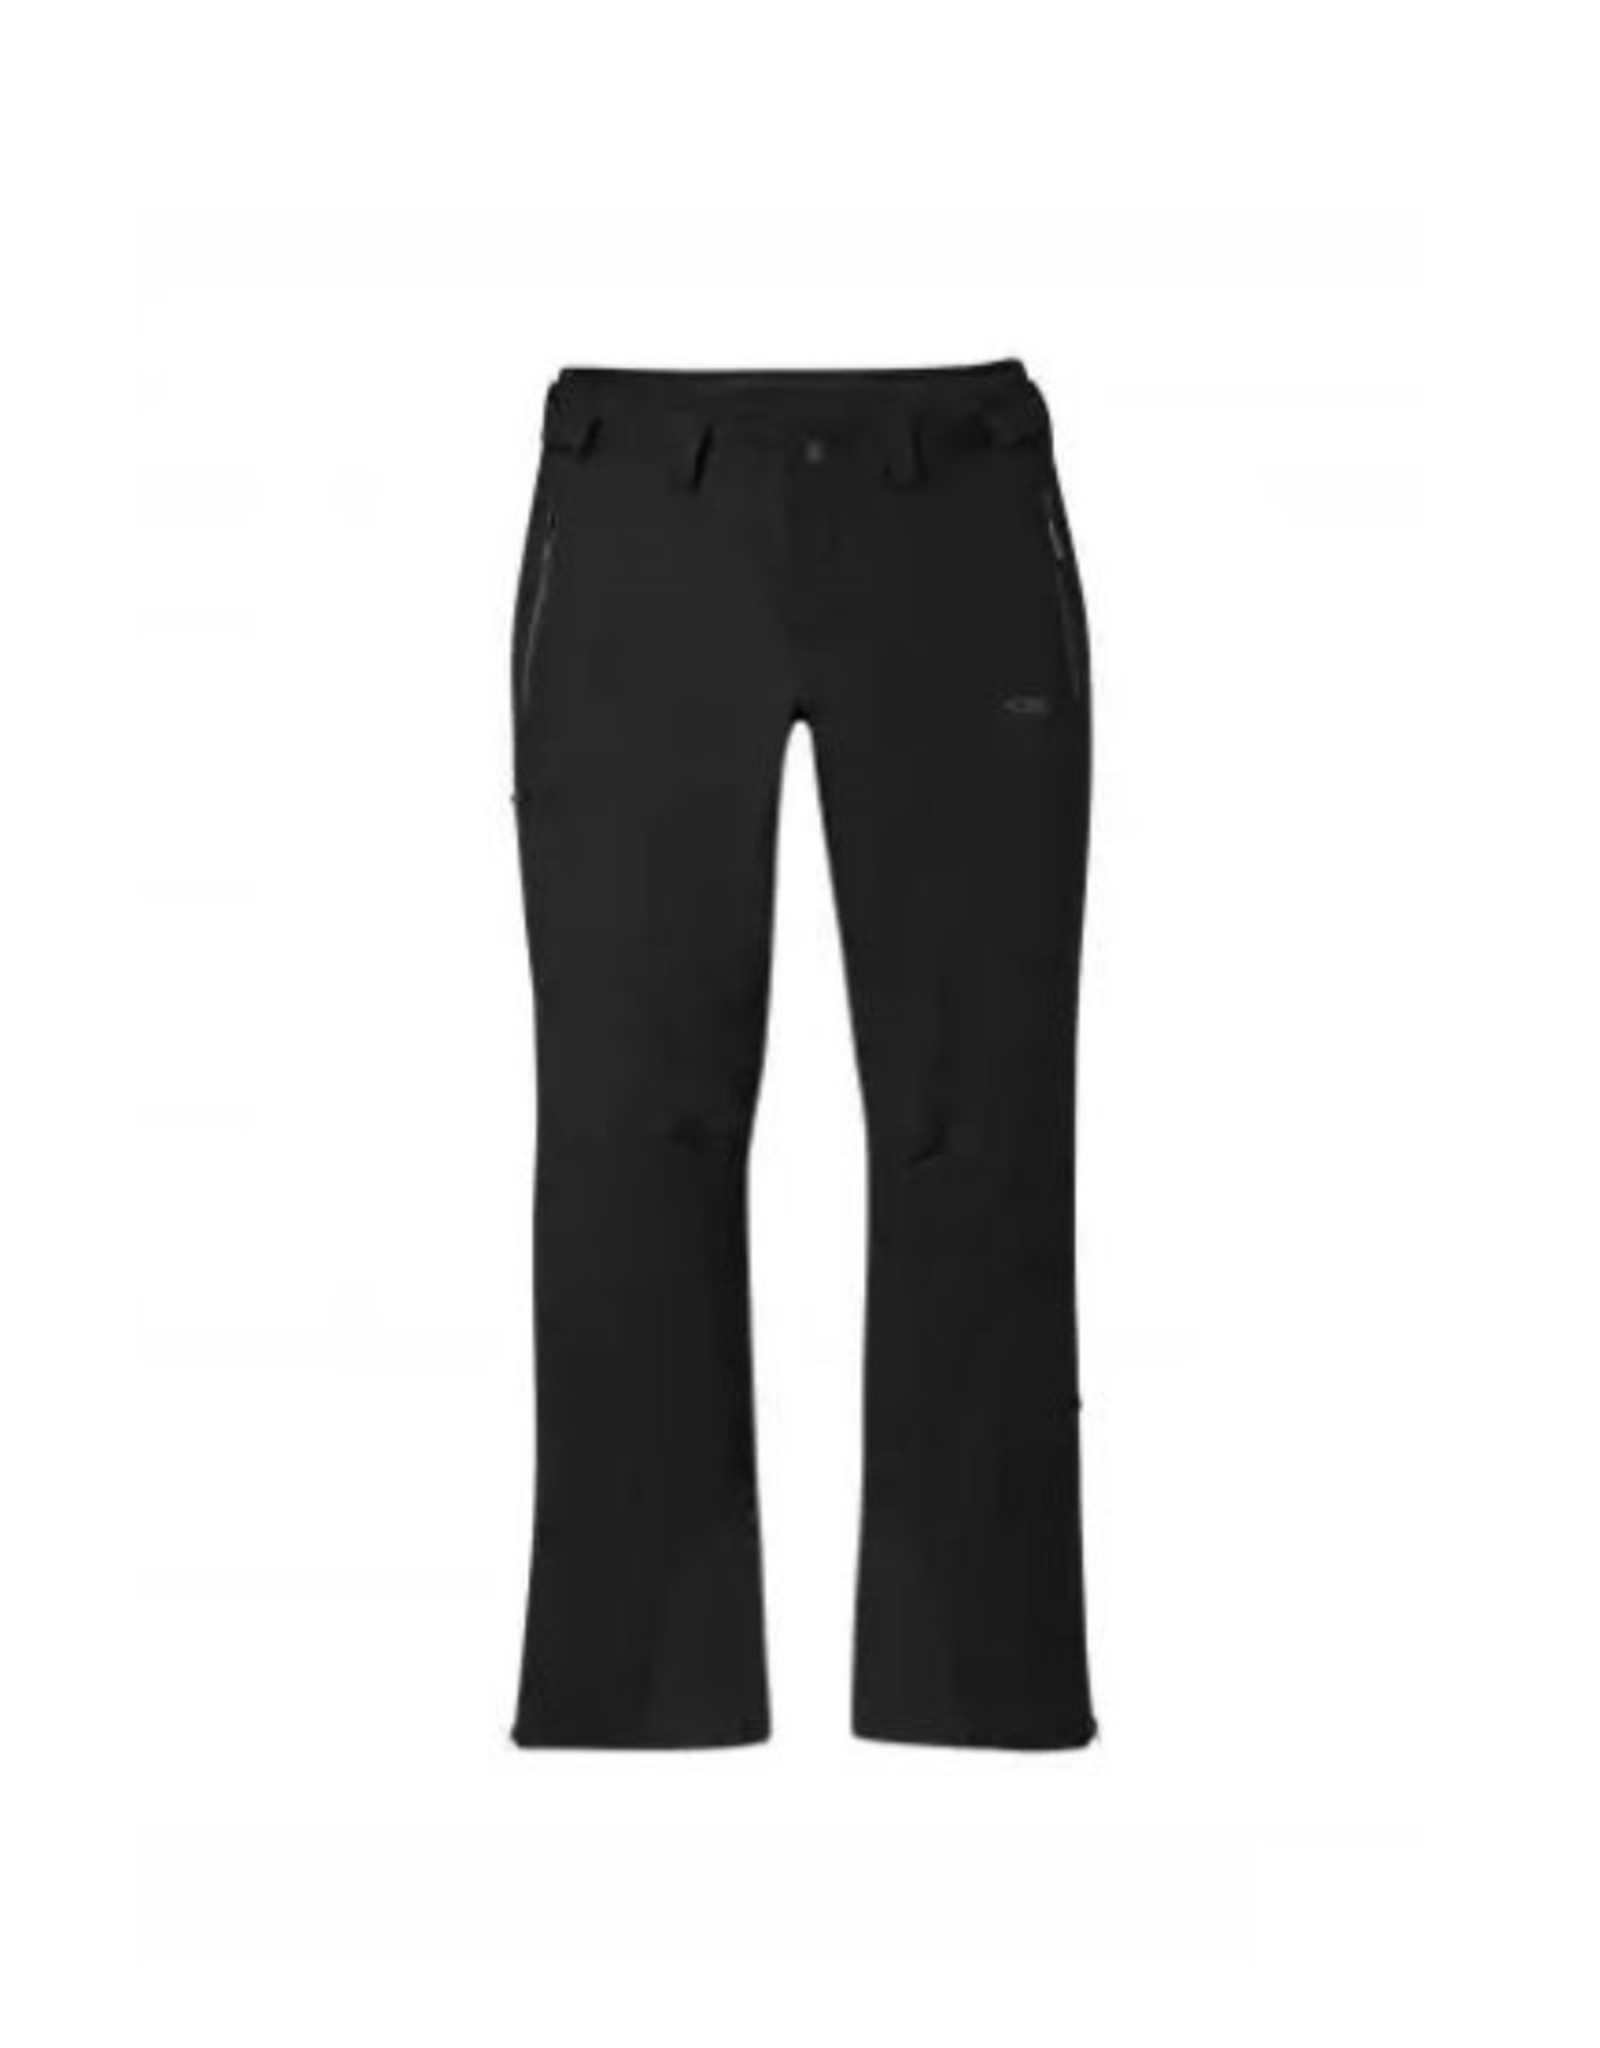 OUTDOOR RESEARCH CIRQUE II PANT WMNS